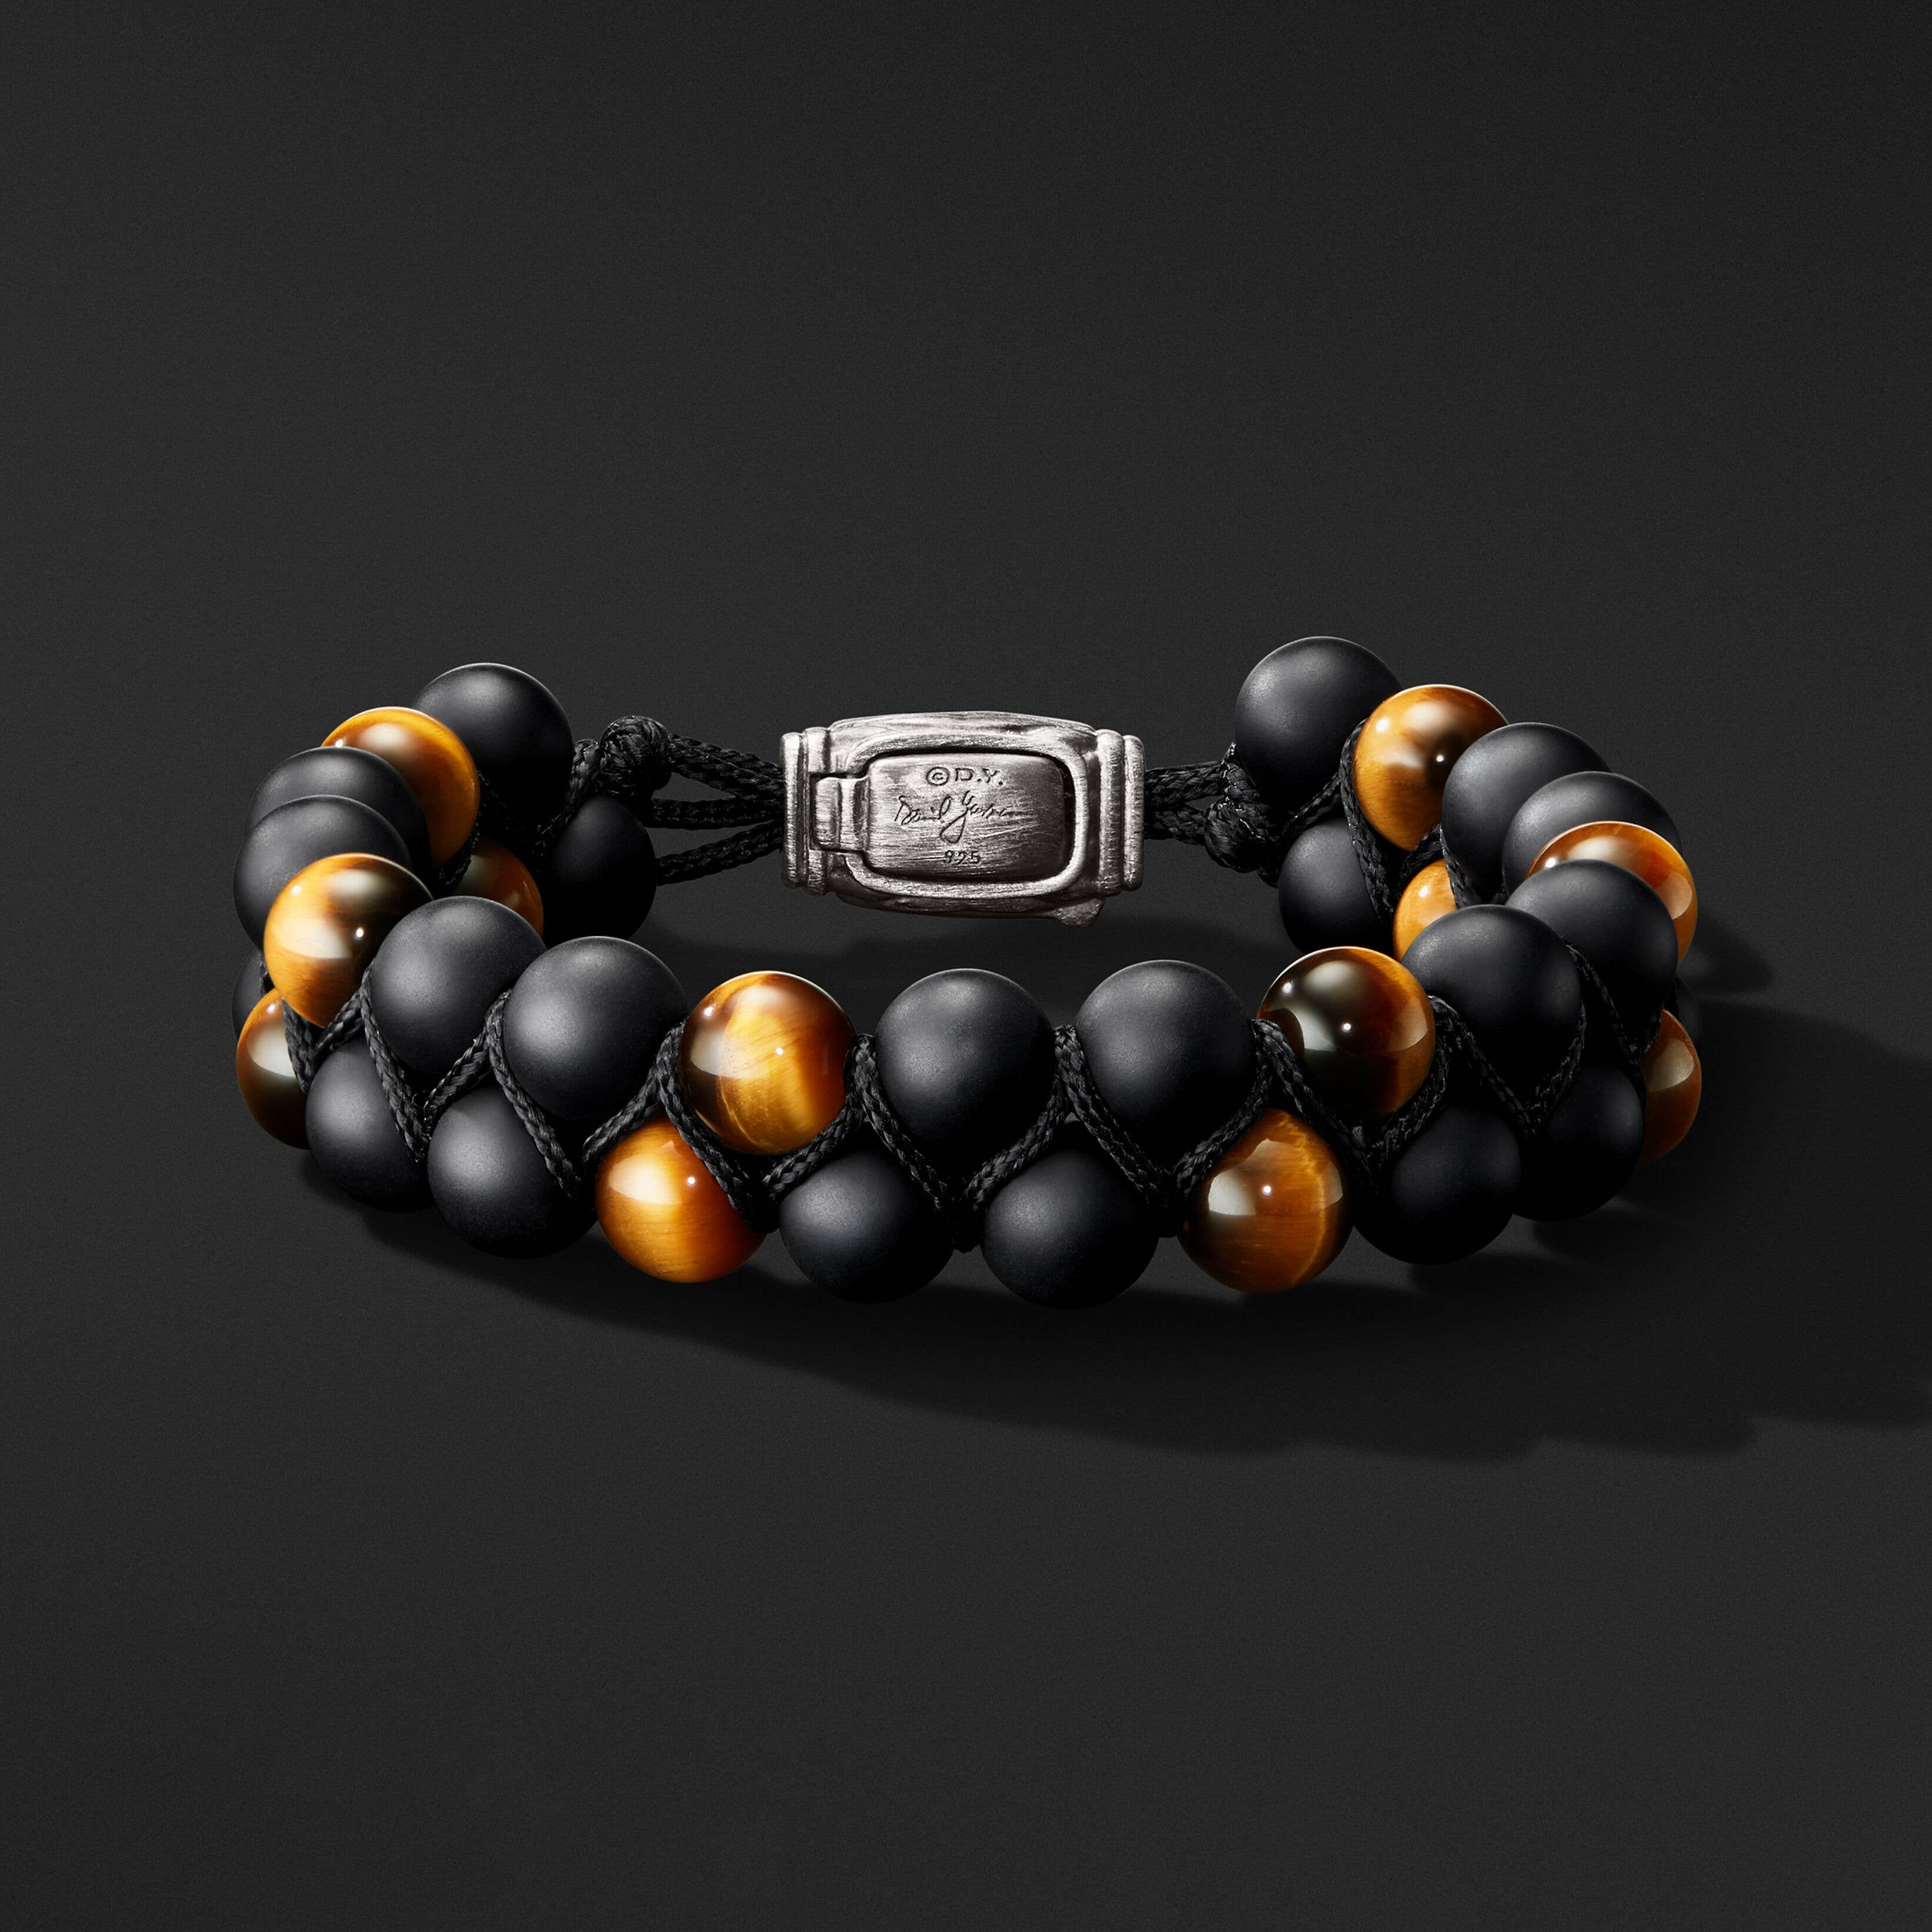 Spiritual Beads Two Row Woven Bracelet with Black Onyx and Tiger's Eye